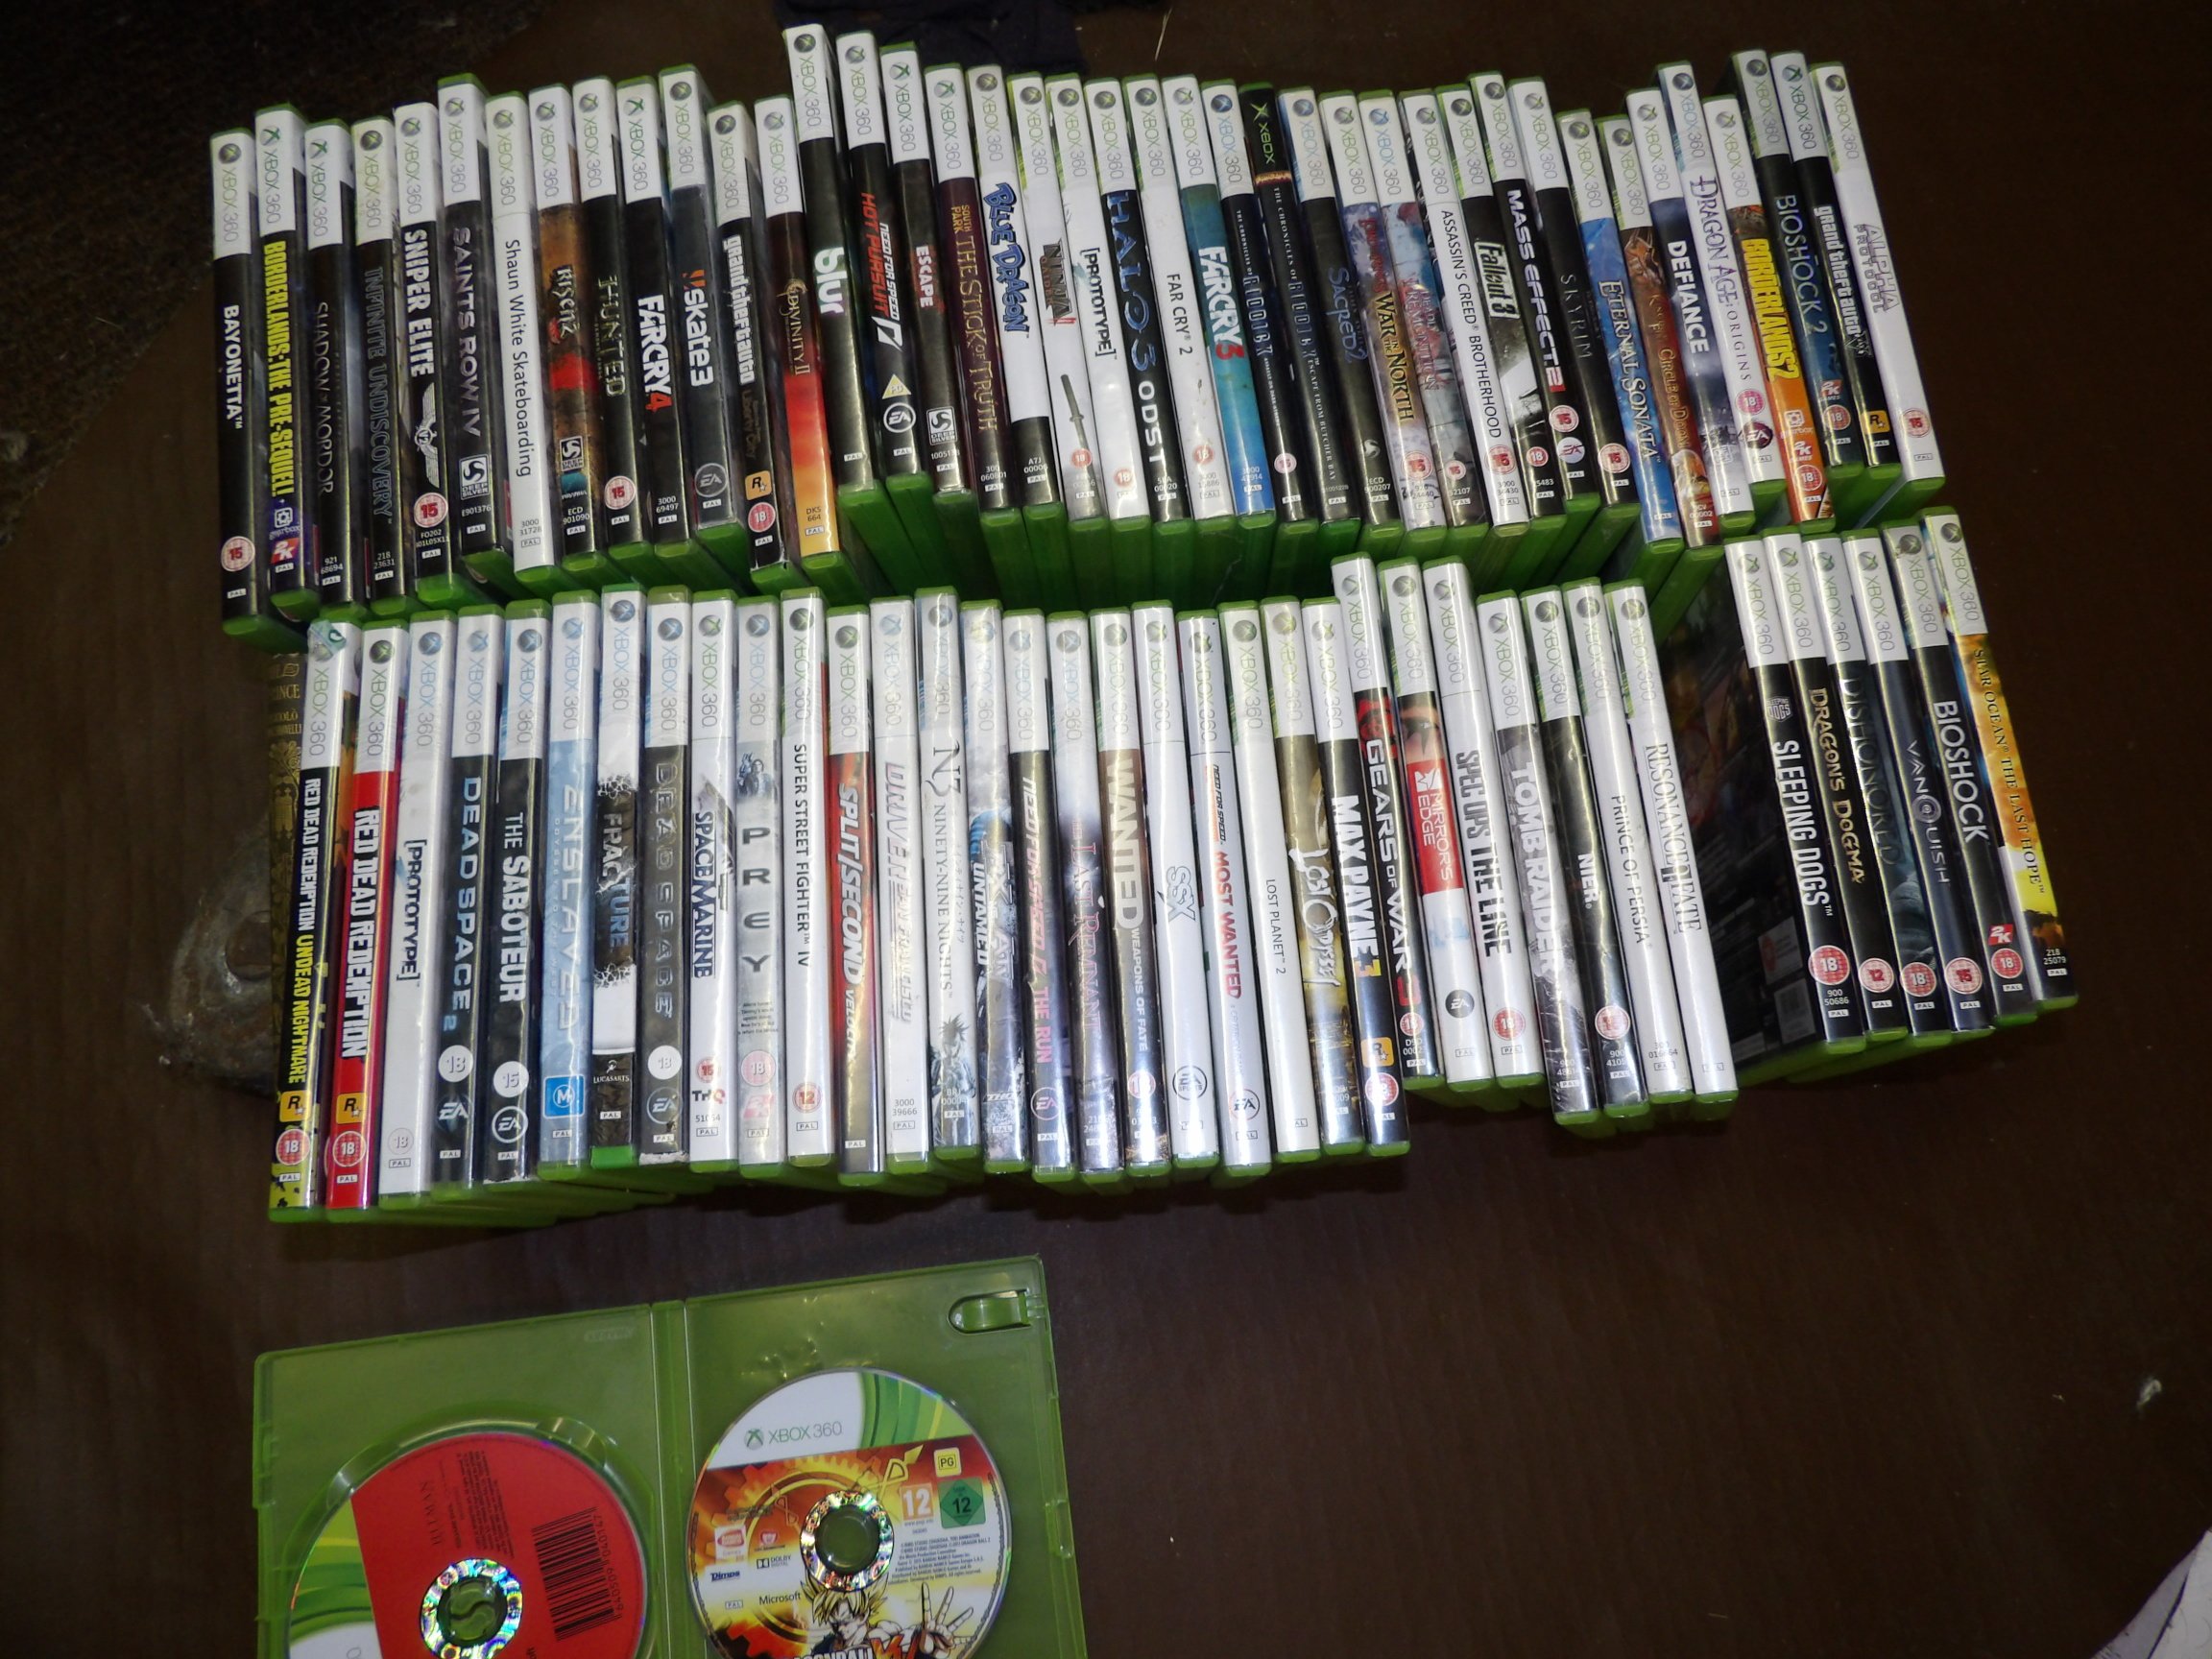 Skate 2 is on this list of Xbox 360 games being removed from the